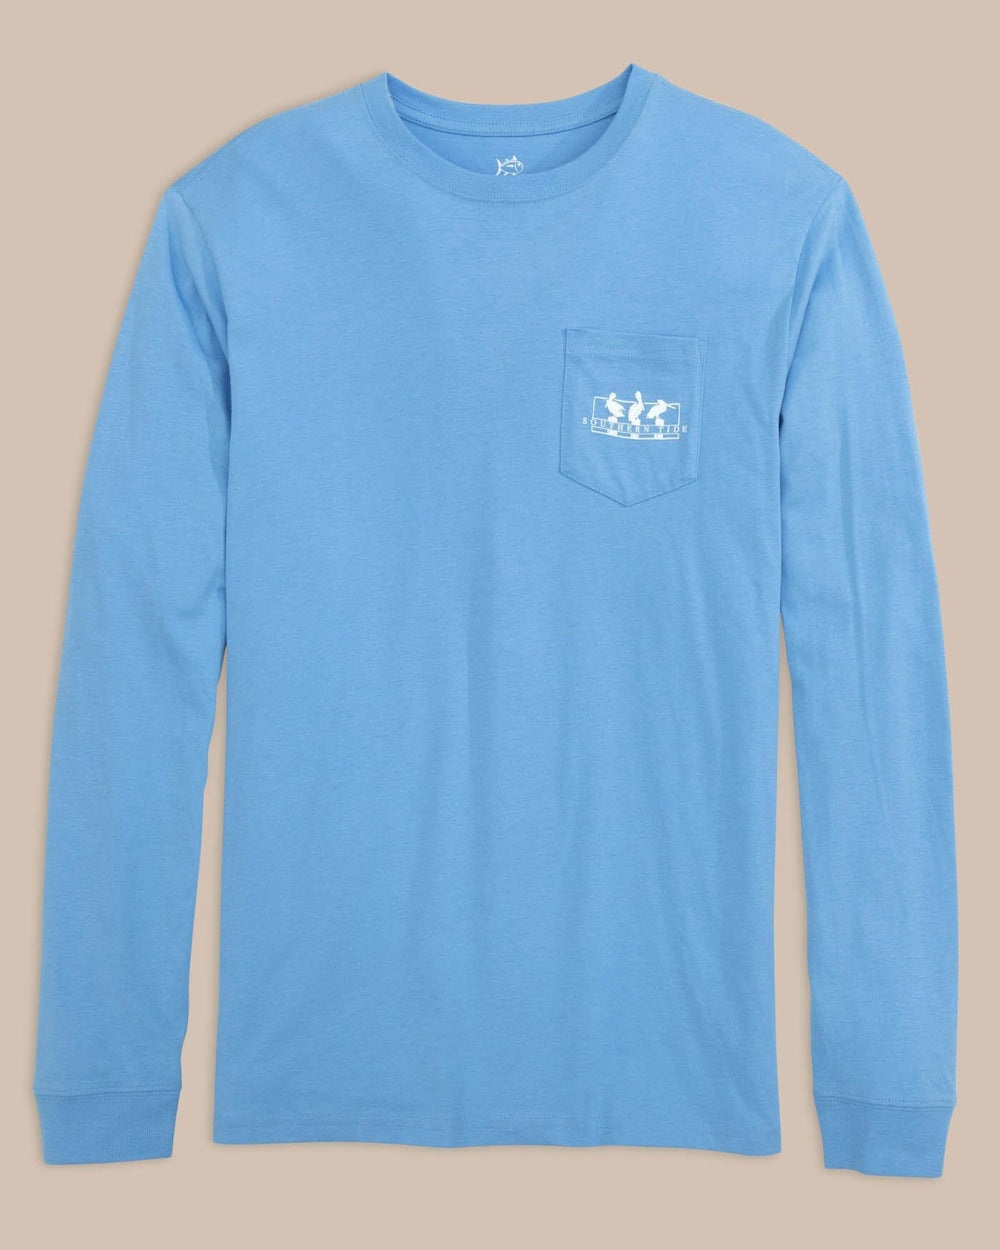 The front view of the Pelican Sunset Long Sleeve T-Shirt by Southern Tide - Ocean Channel